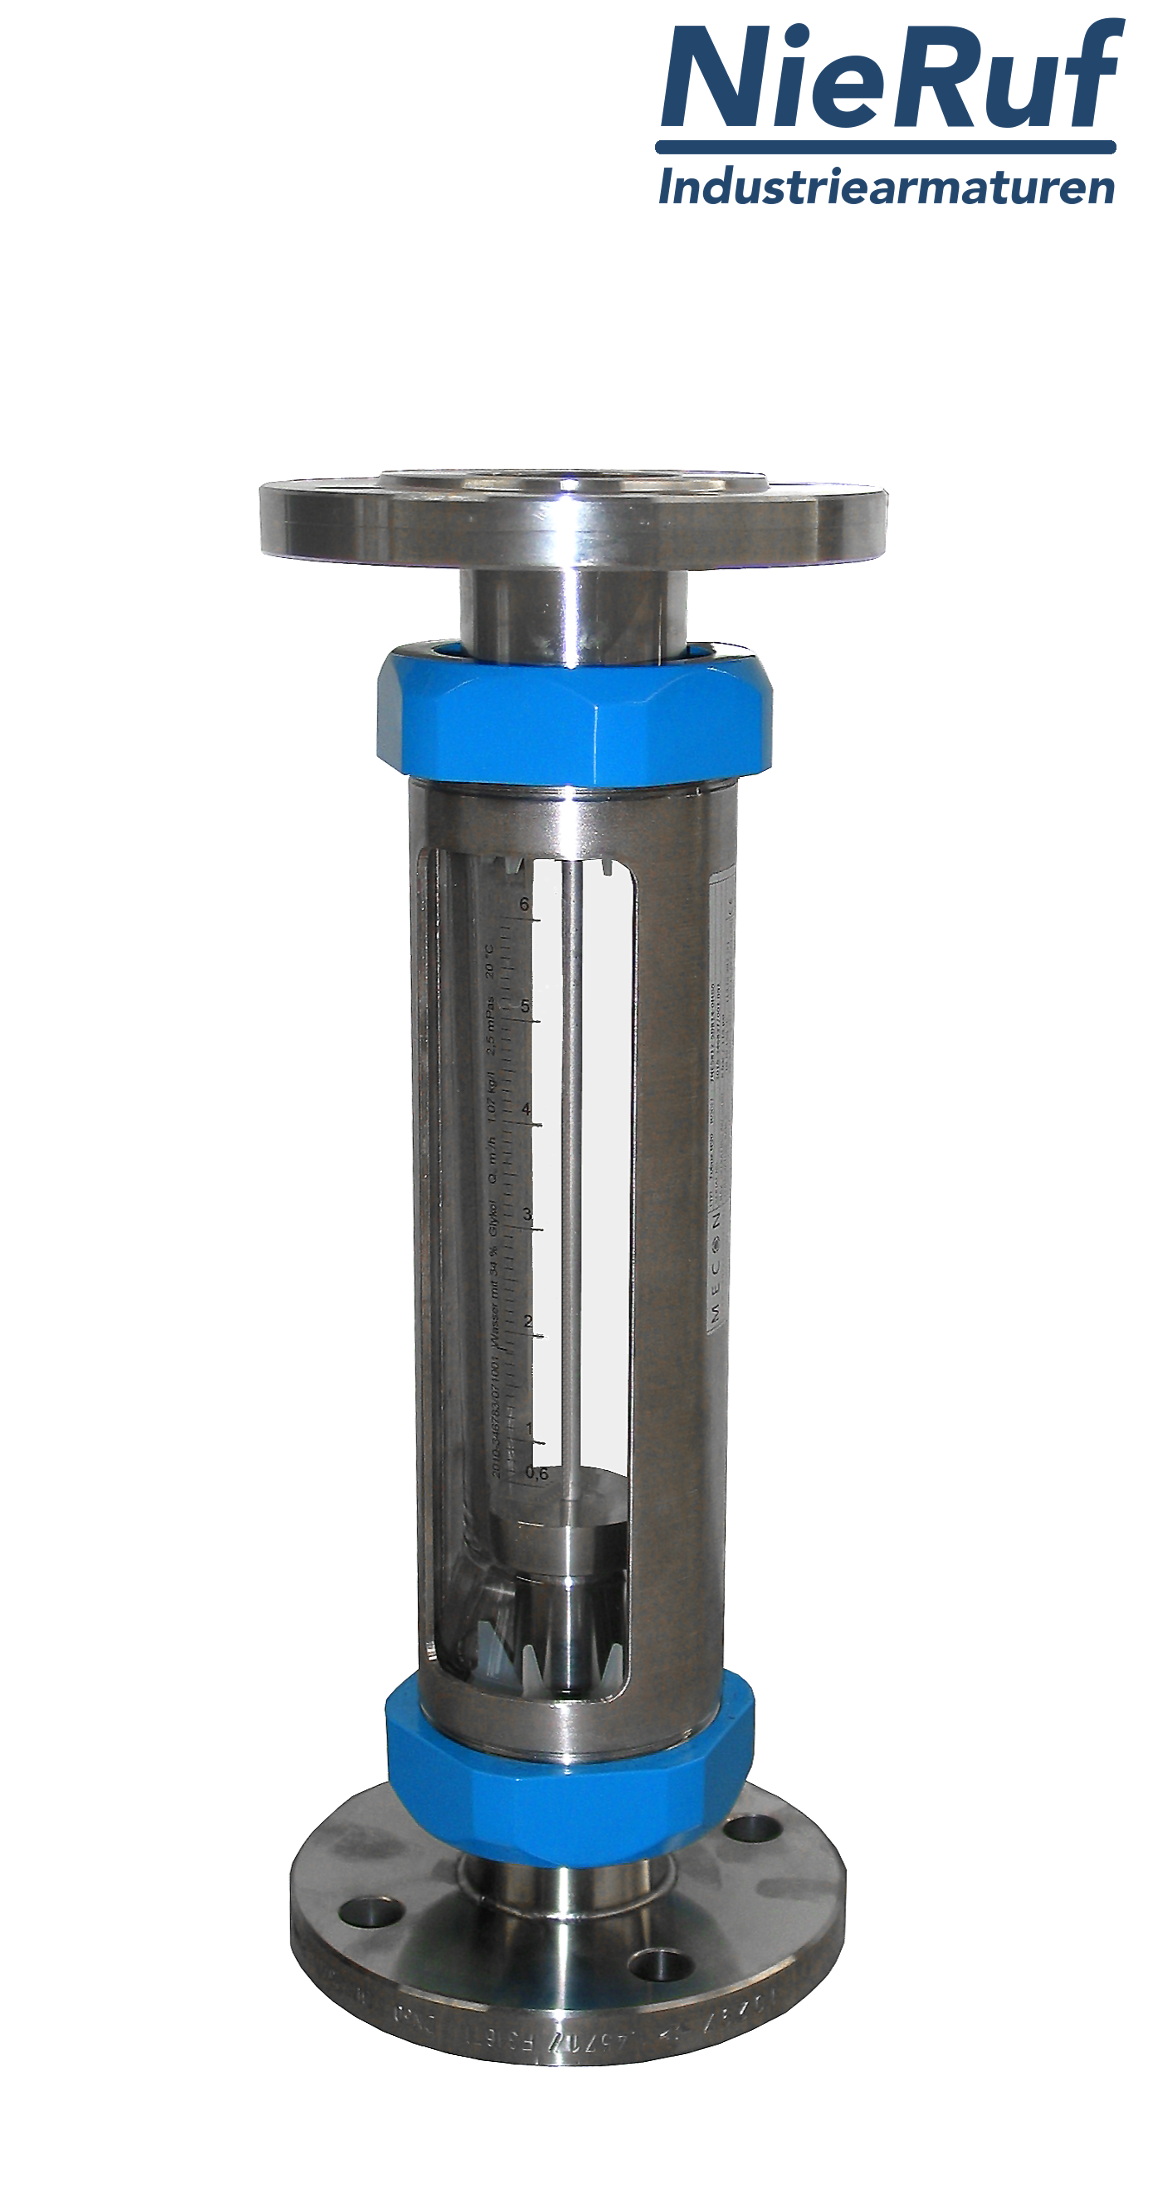 Variable area flowmeter stainless steel + borosilicate flange DN65 800.0 - 8000 l/h water FKM